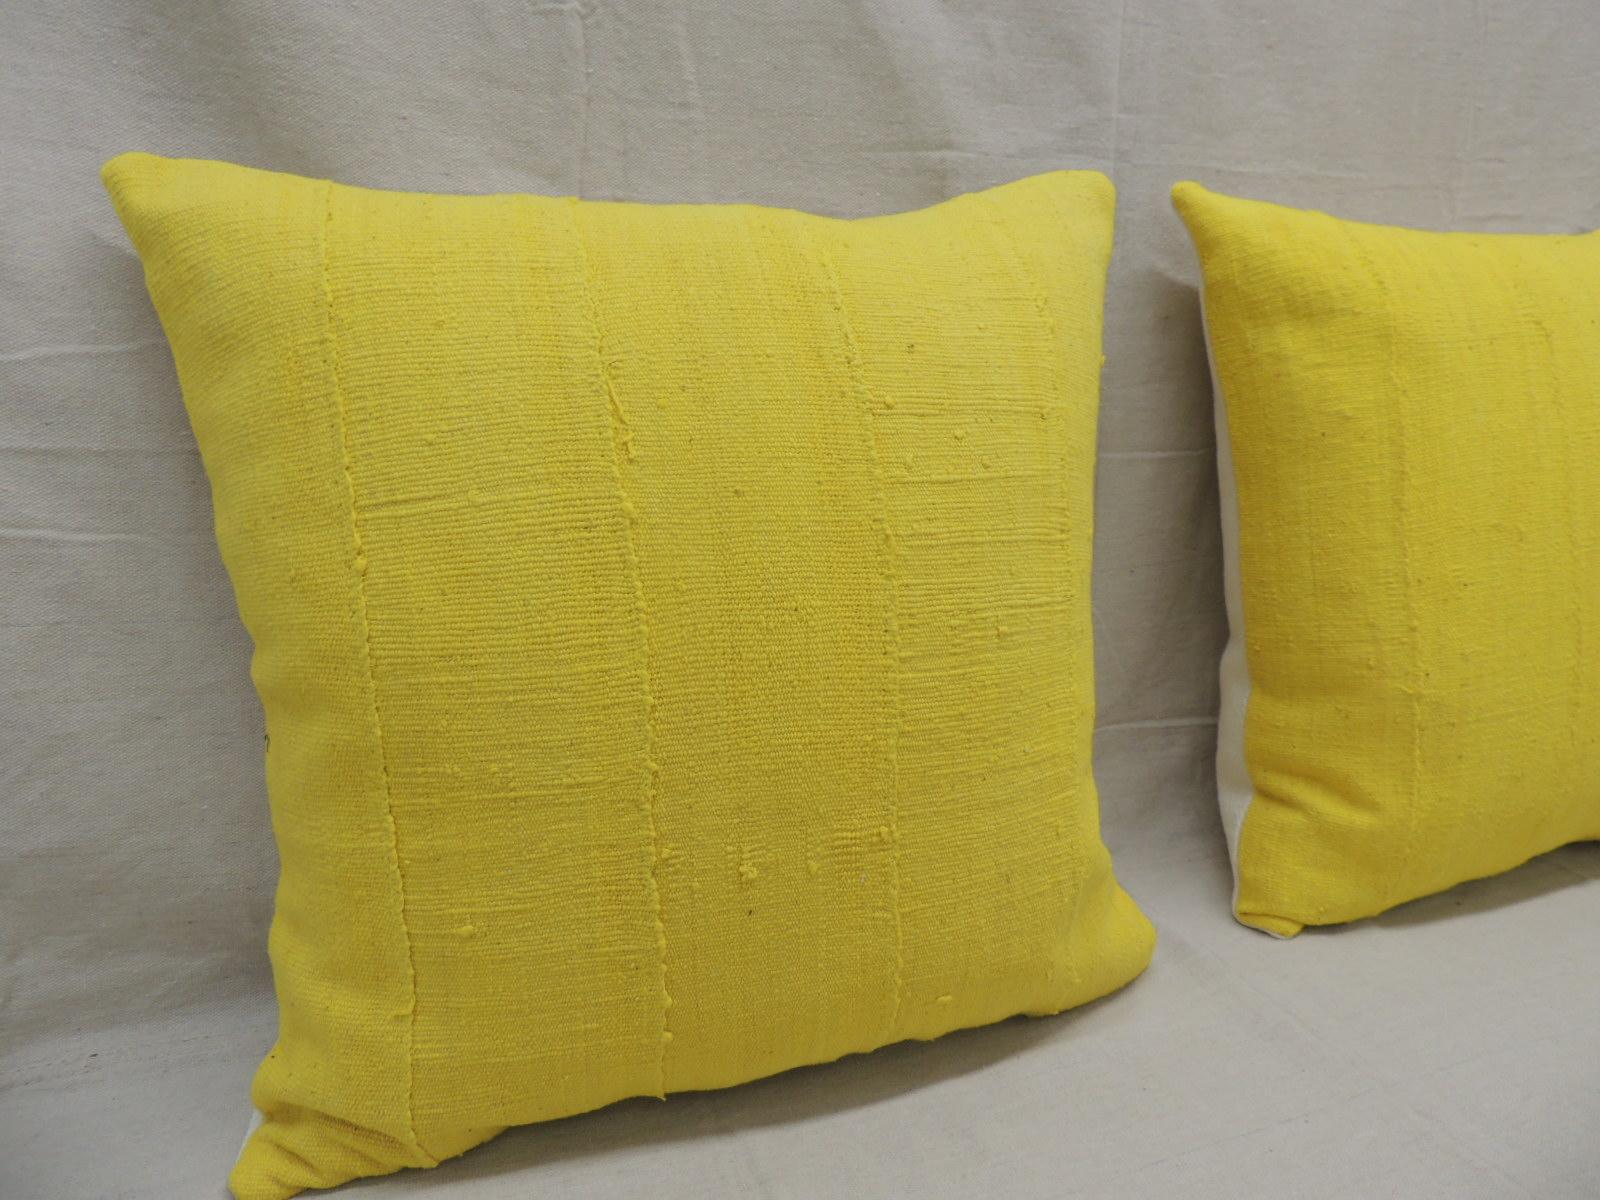 Pair of vintage canary yellow African mud cloth square decorative pillows
with textured white heavy linen backings.
Decorative pillow handcrafted and designed in the USA.
Closure by stitch (no zipper closure) with custom made pillow